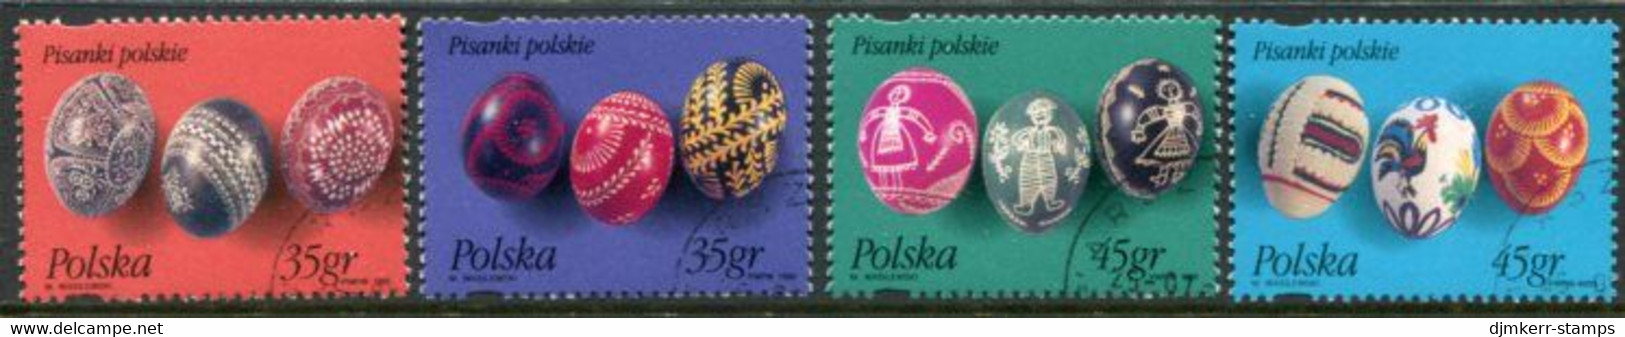 POLAND 1995 Decorated Easter Eggs Used.  Michel 3526-29 - Used Stamps